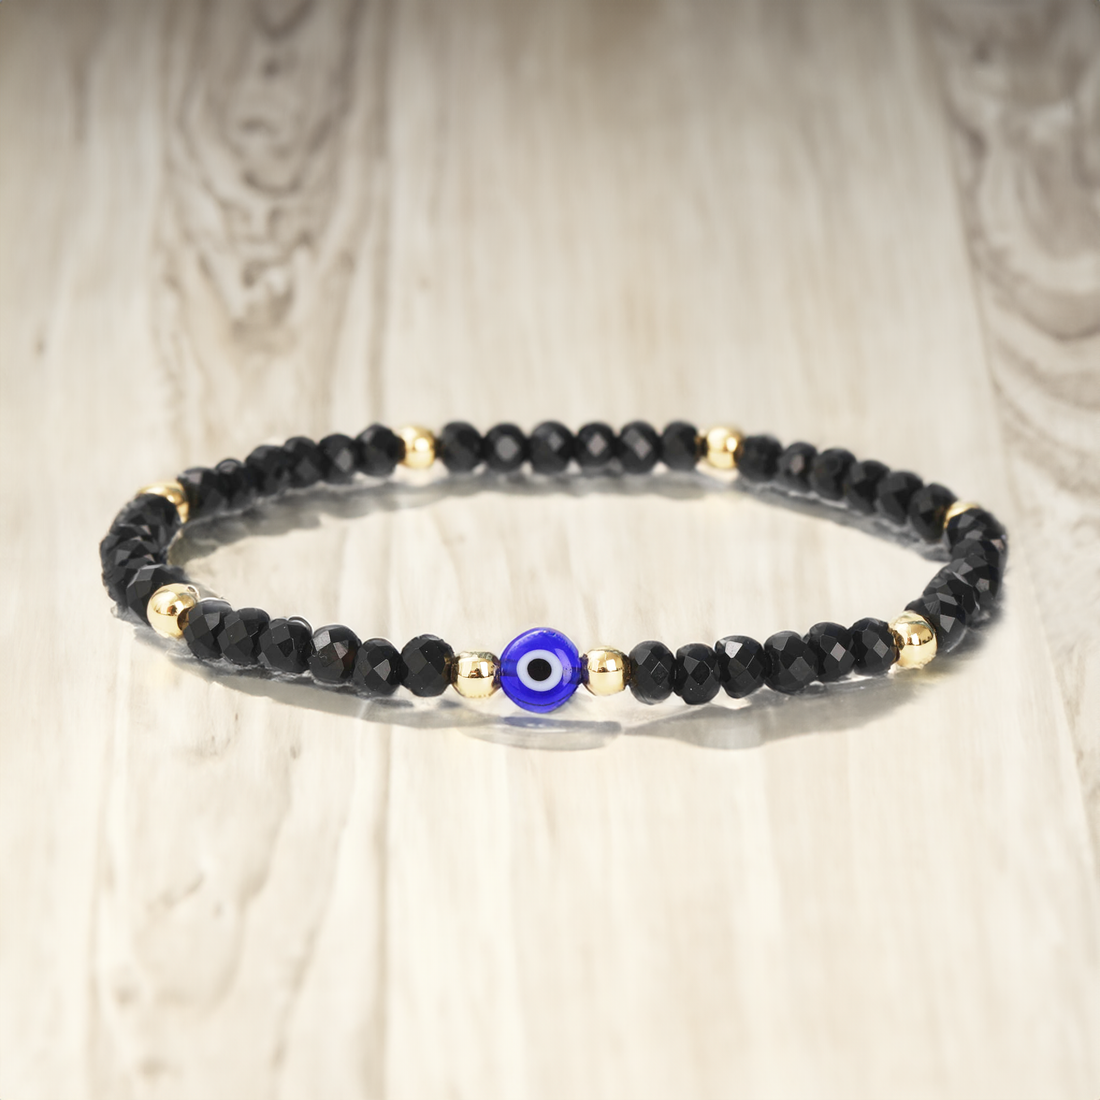 Evil Eye Bracelet Handmade Natural Stone Black Agate Faceted Rondelle Beads Women's Jewlery Powerful Protection Safe